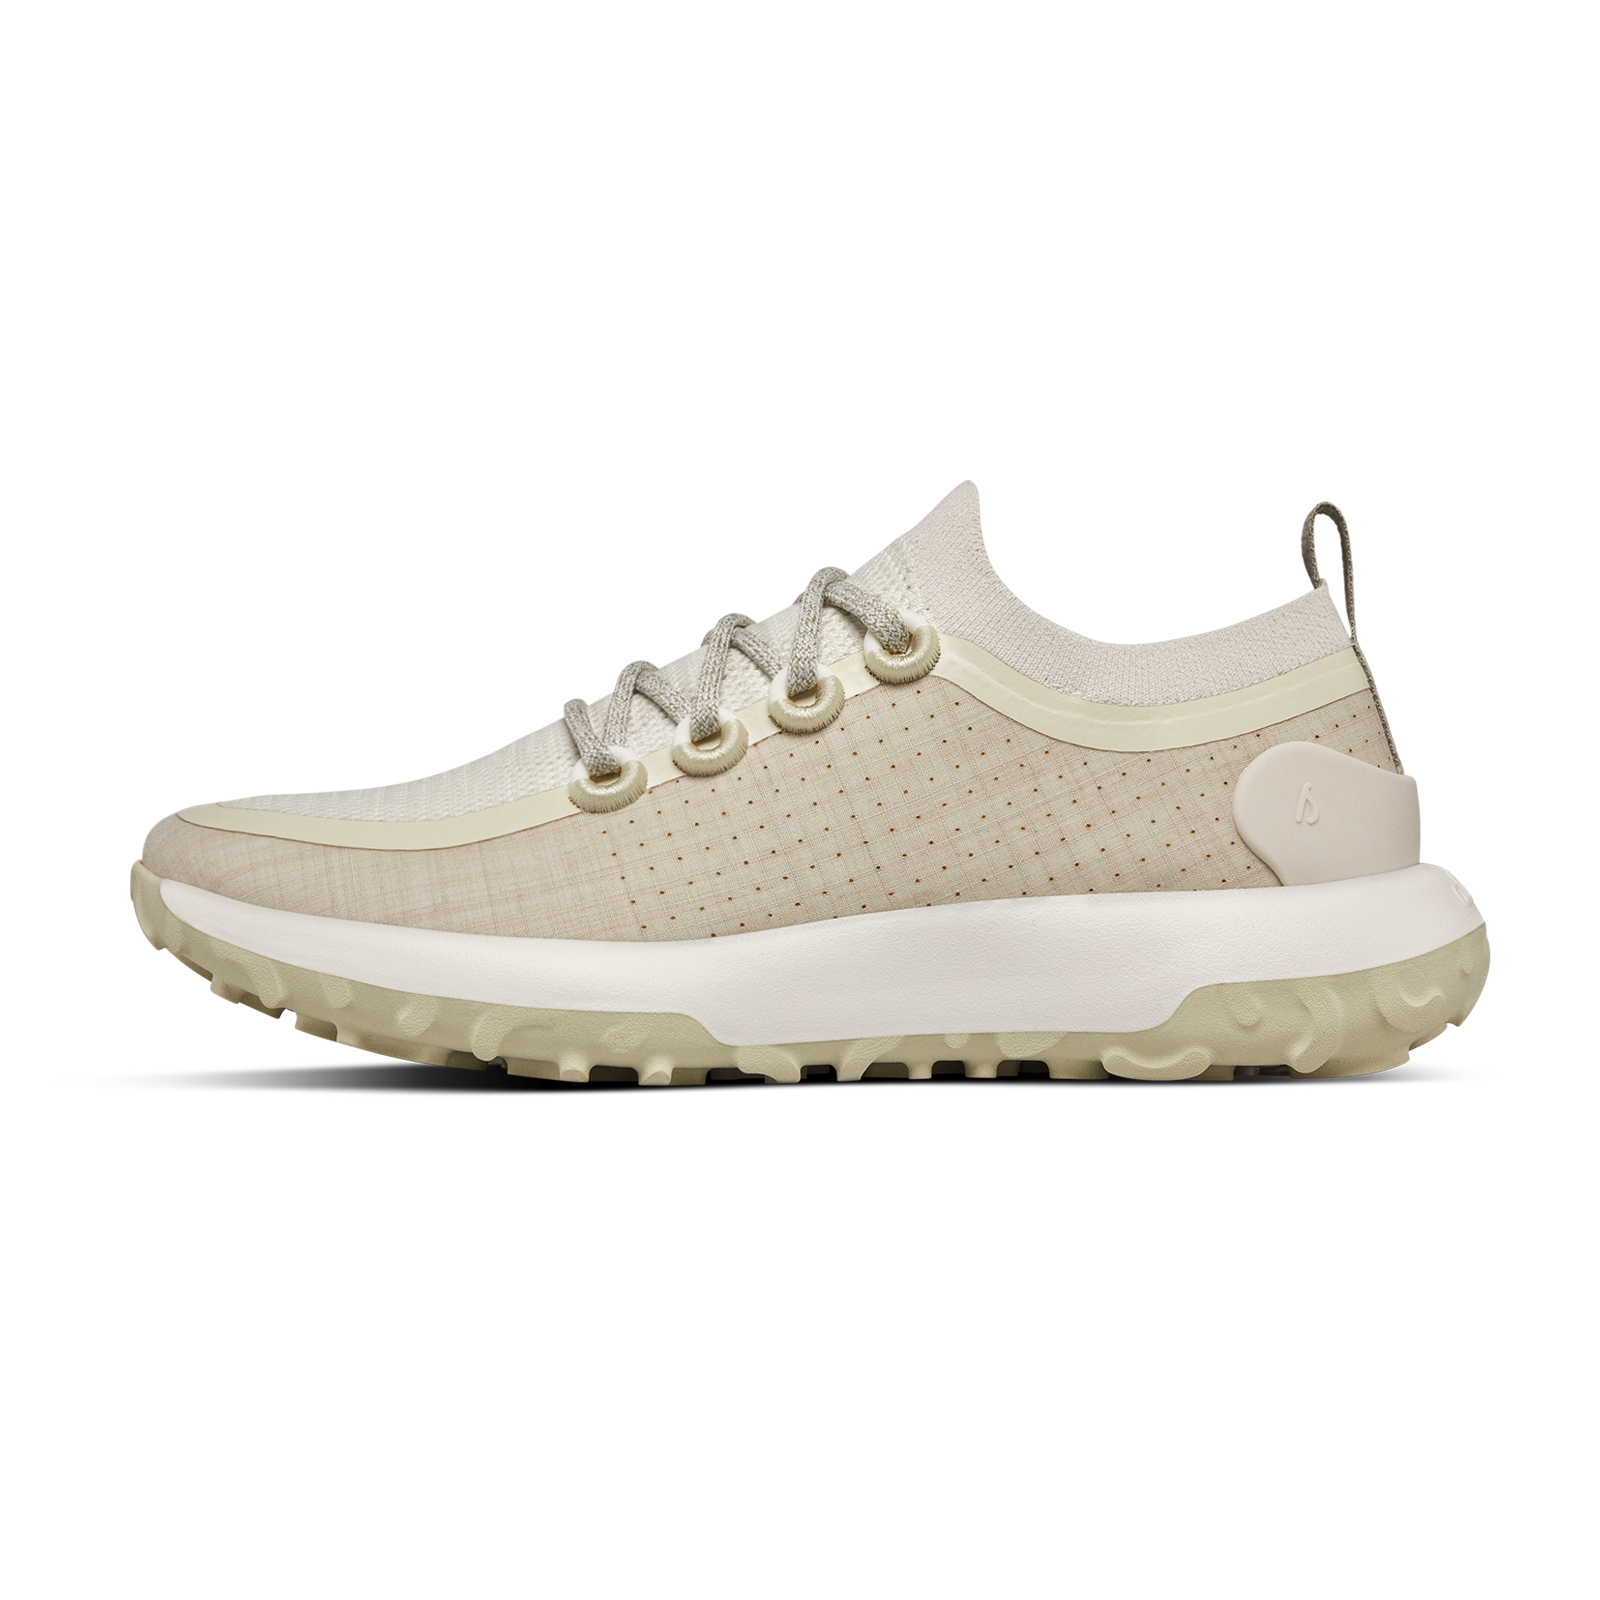 Women's Trail Runners SWT - Natural White (Cream Sole)